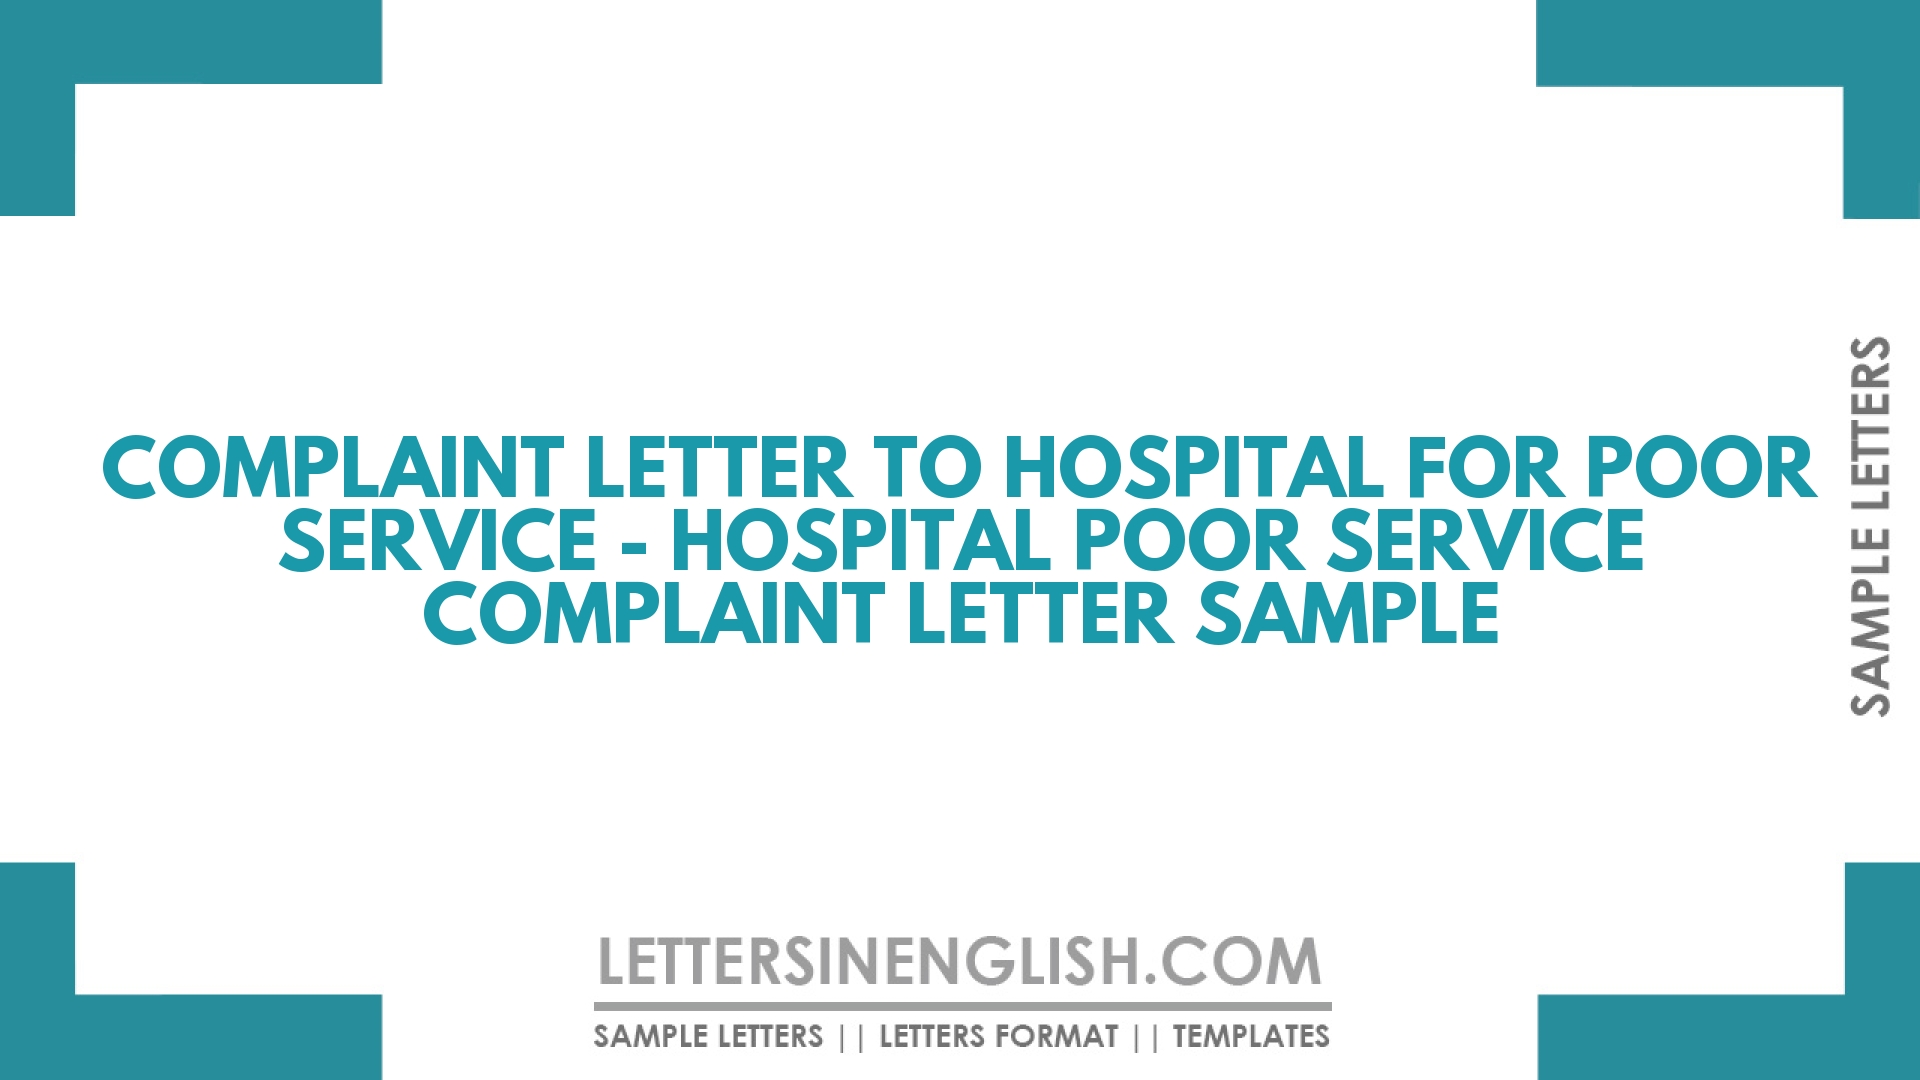 Complaint Letter to Hospital for Poor Service – Hospital Poor Service Complaint Letter Sample